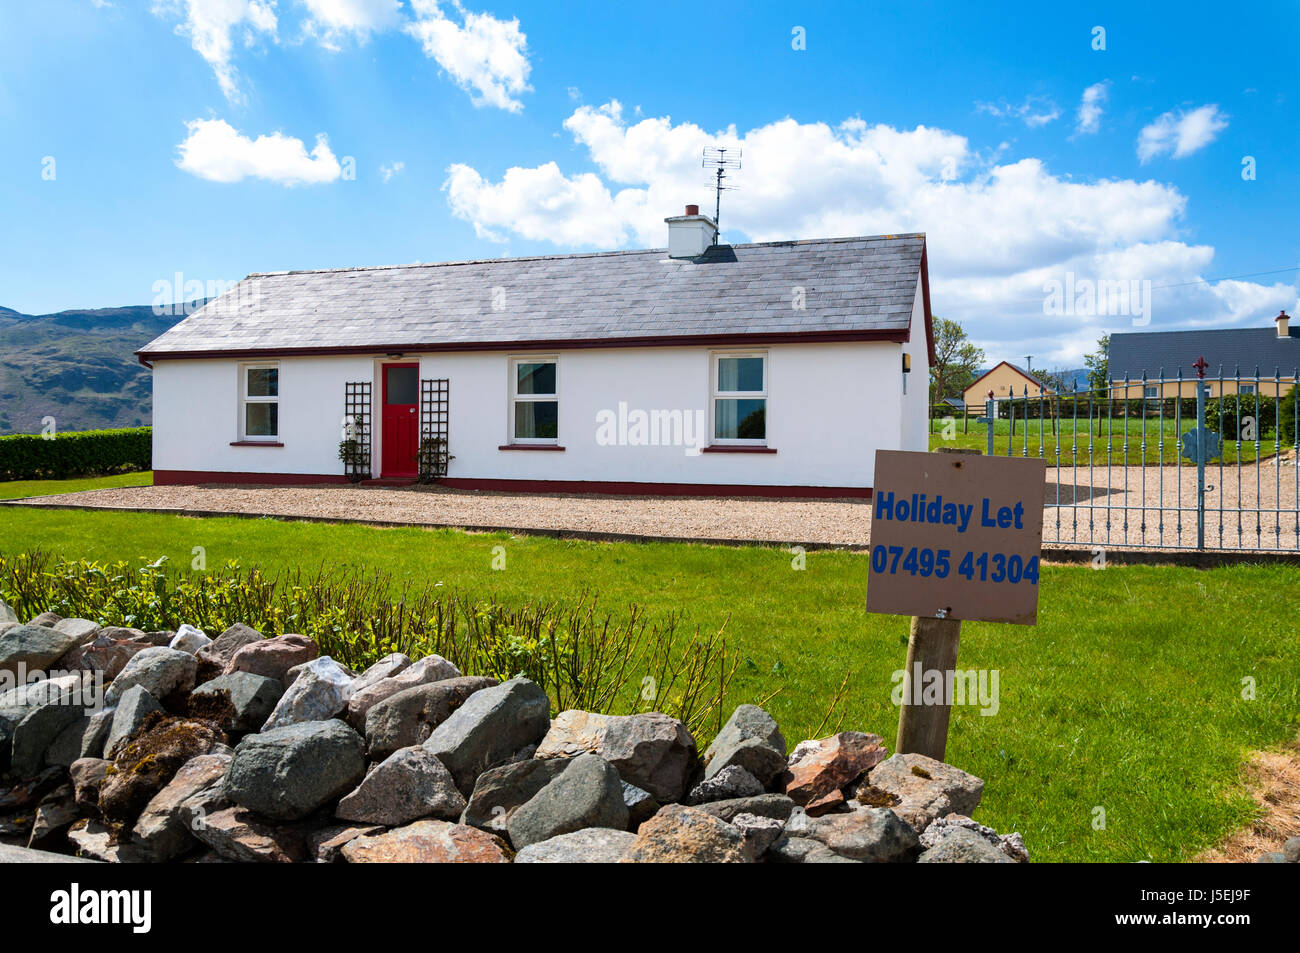 Holiday cottage to let sign, Loughros Point, Ardara, County Donegal, Ireland Stock Photo